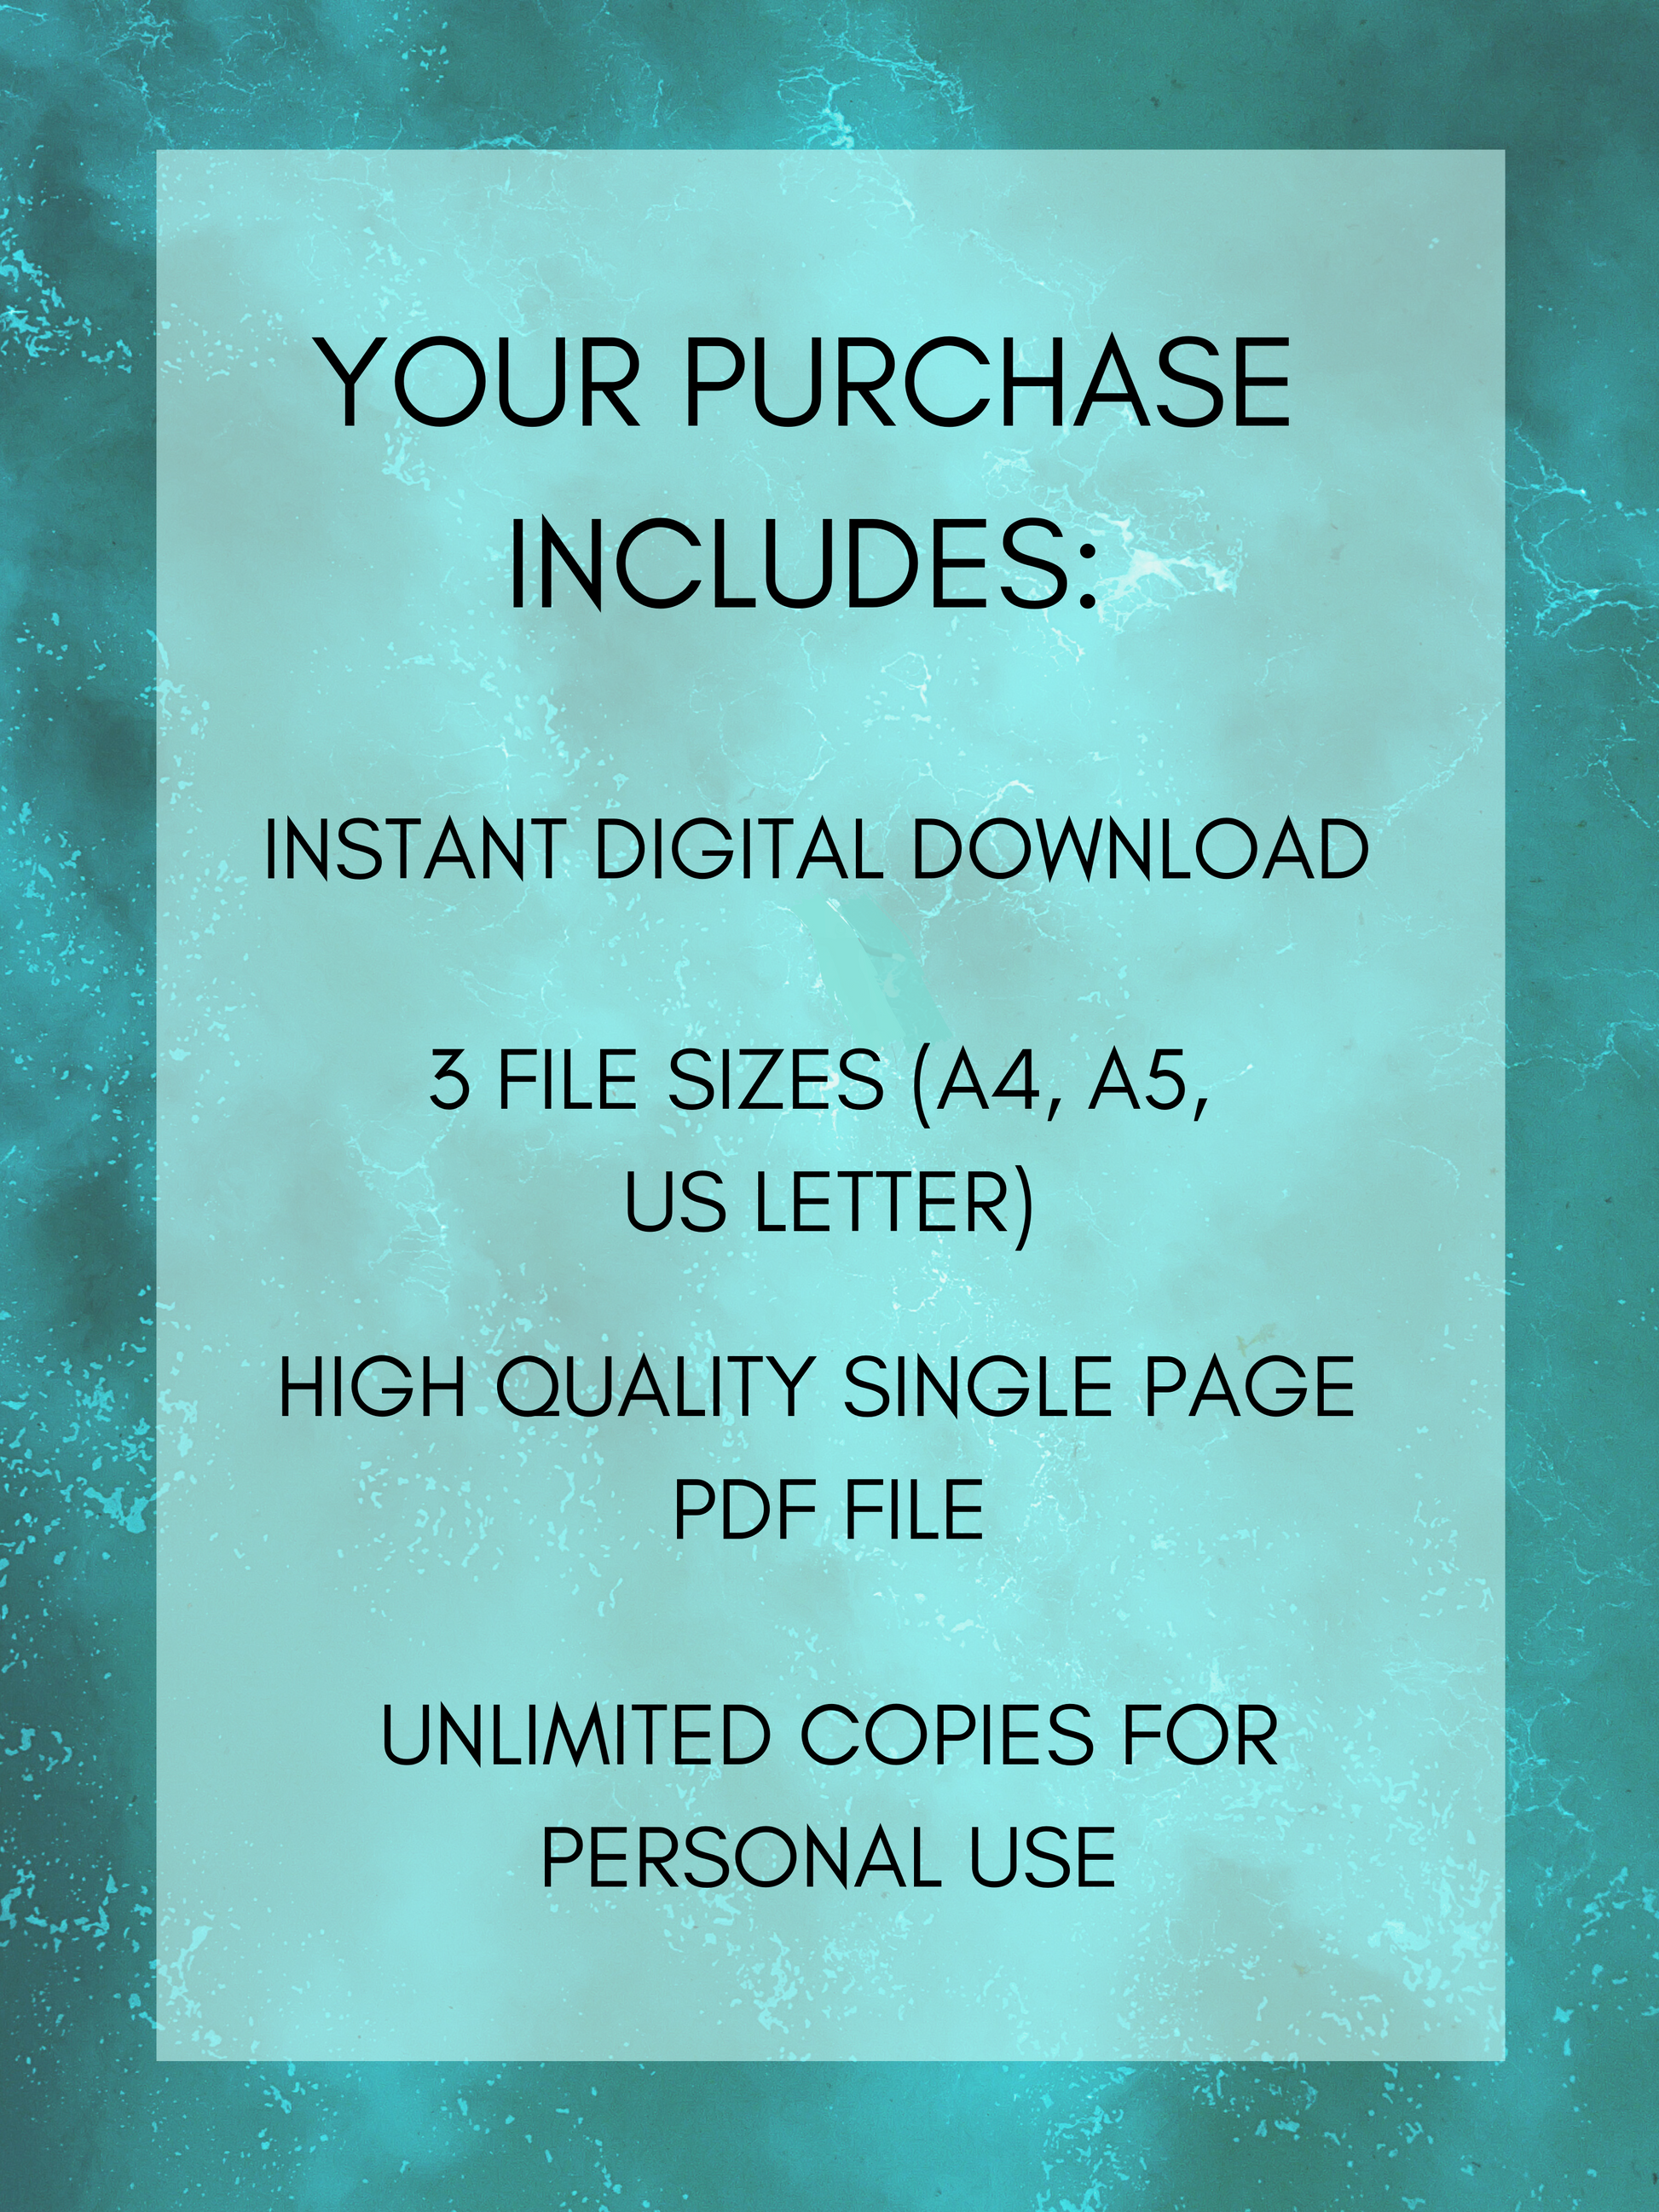 Instant digital download PDF comes in A4, A5, and US Letter sizes